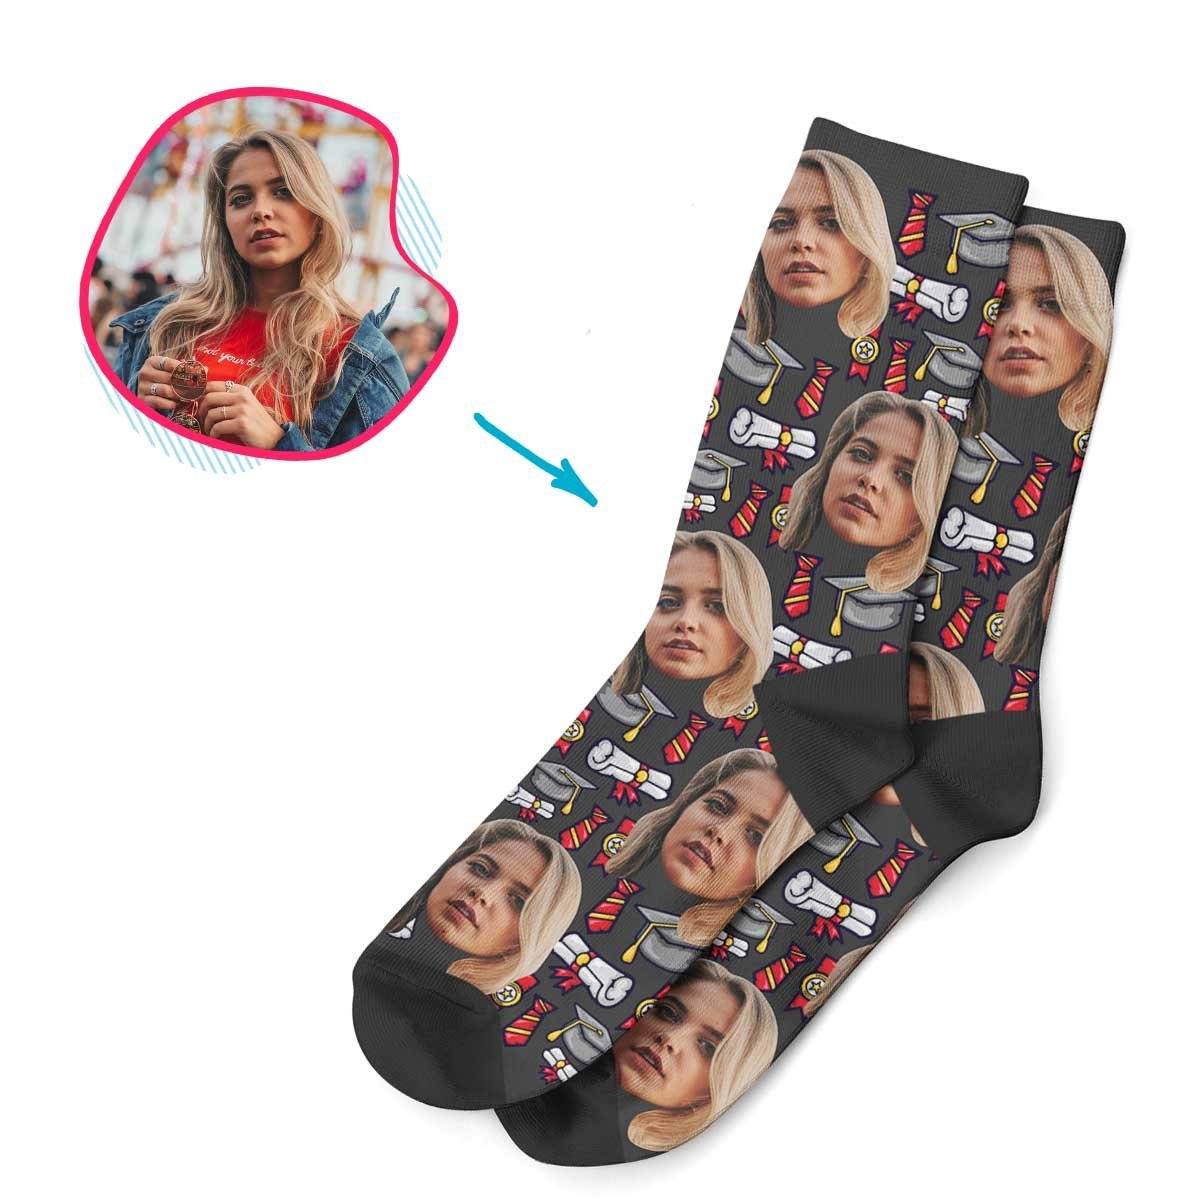 Dark Students & Graduates personalized socks with photo of face printed on them